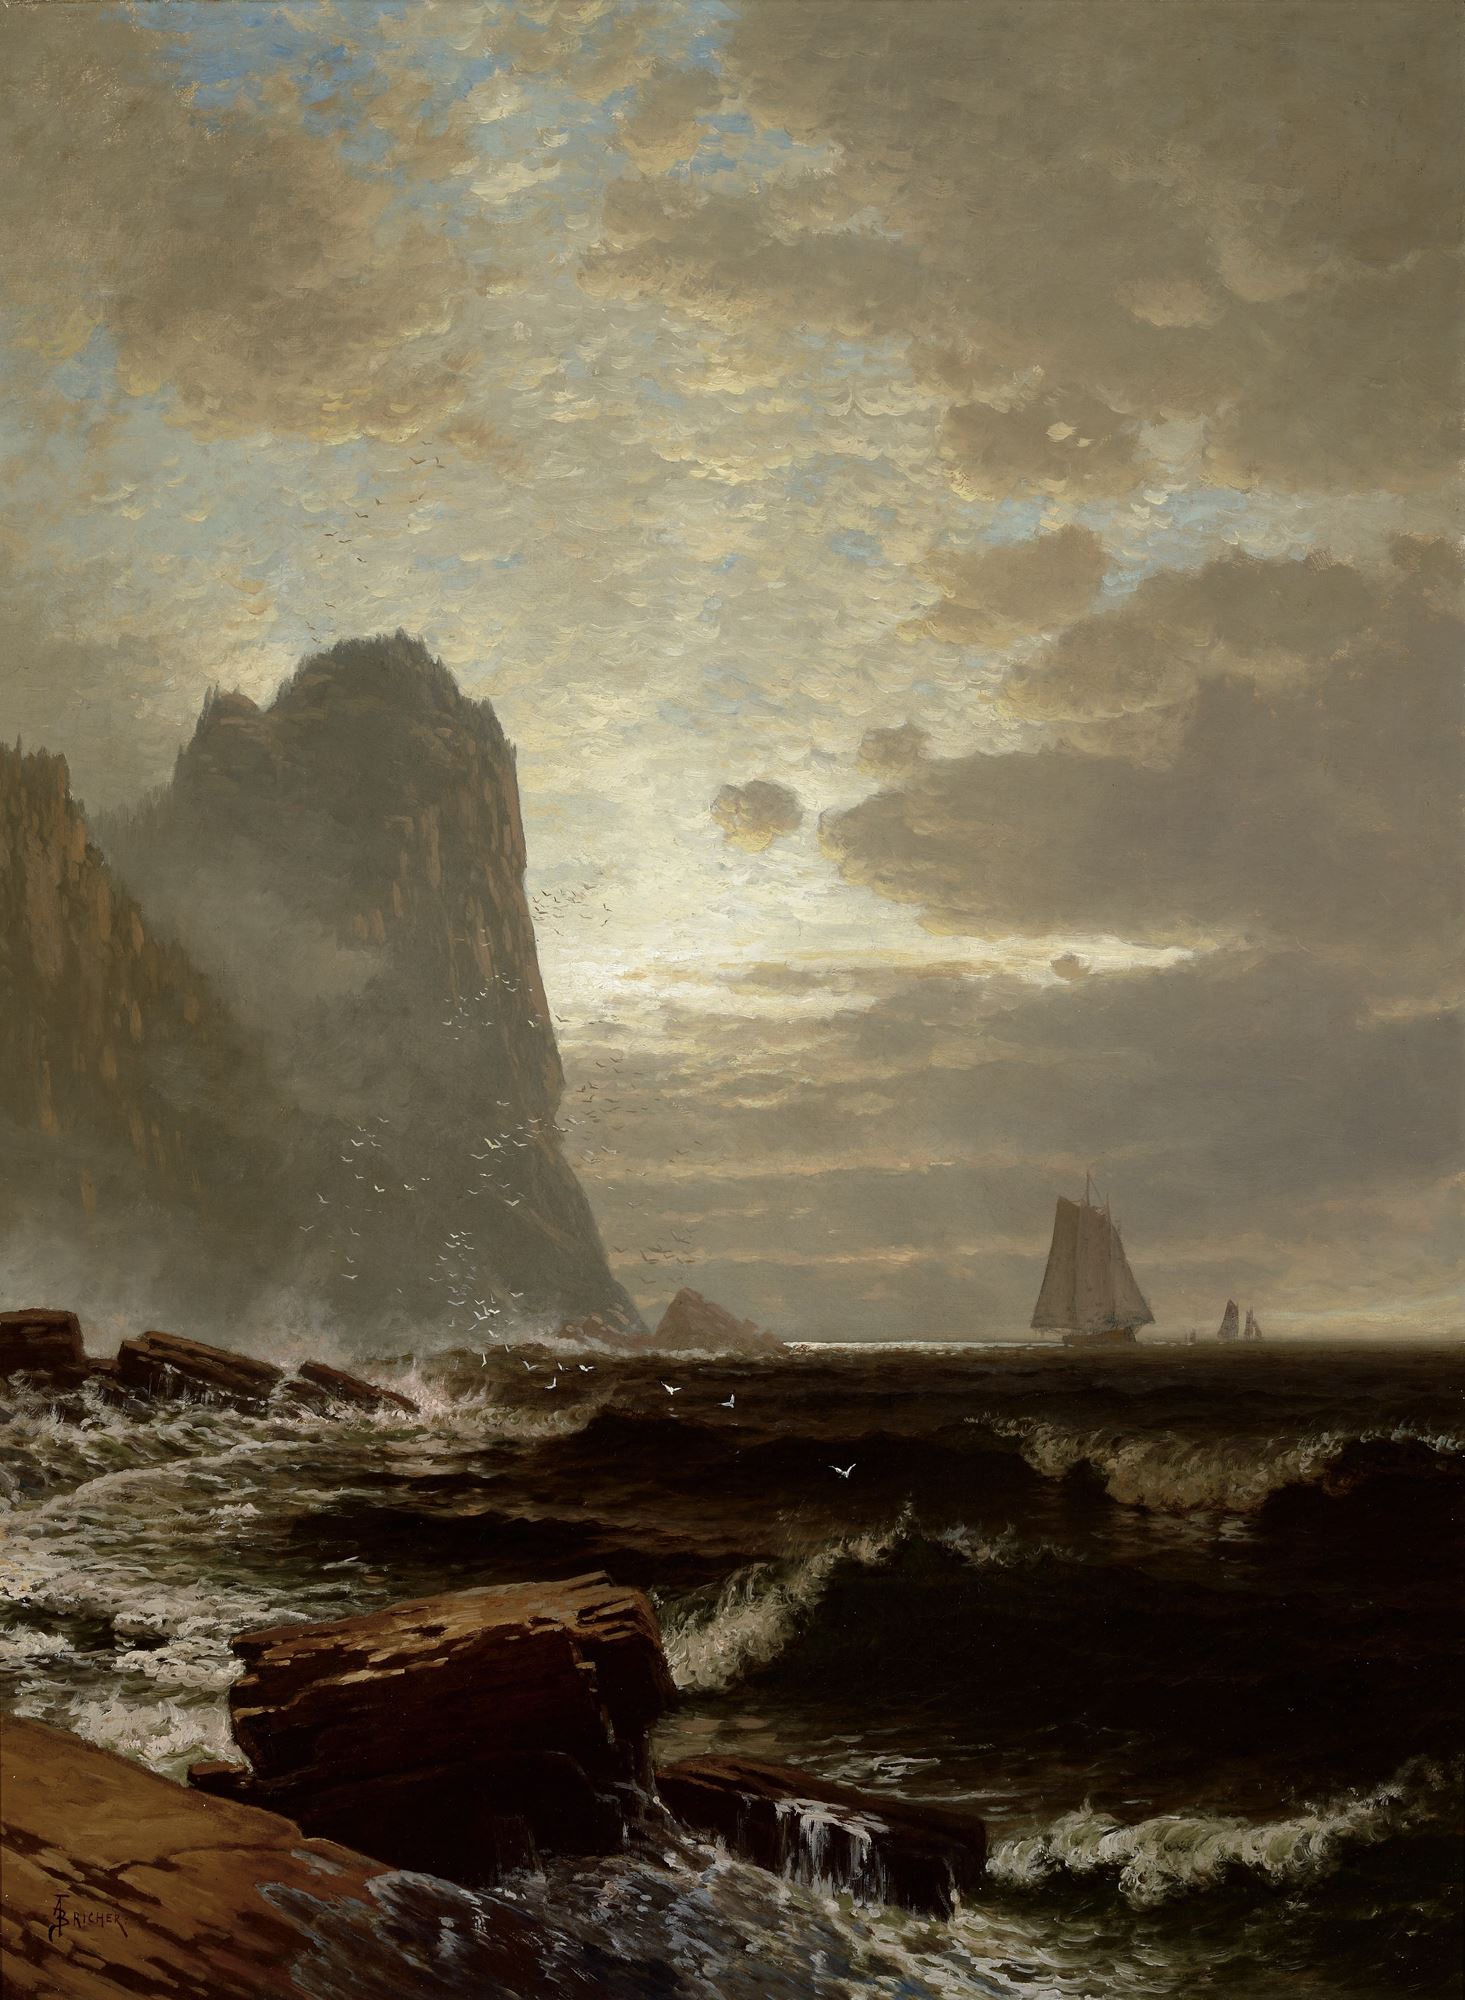 <p>Alfred Thompson Bricher, <i>At the South Head, Grand Manan</i>. Oil on canvas, 55 7/8 x 45 3/4 inches. Collection of the Nasher Museum of Art at Duke University.</p>
